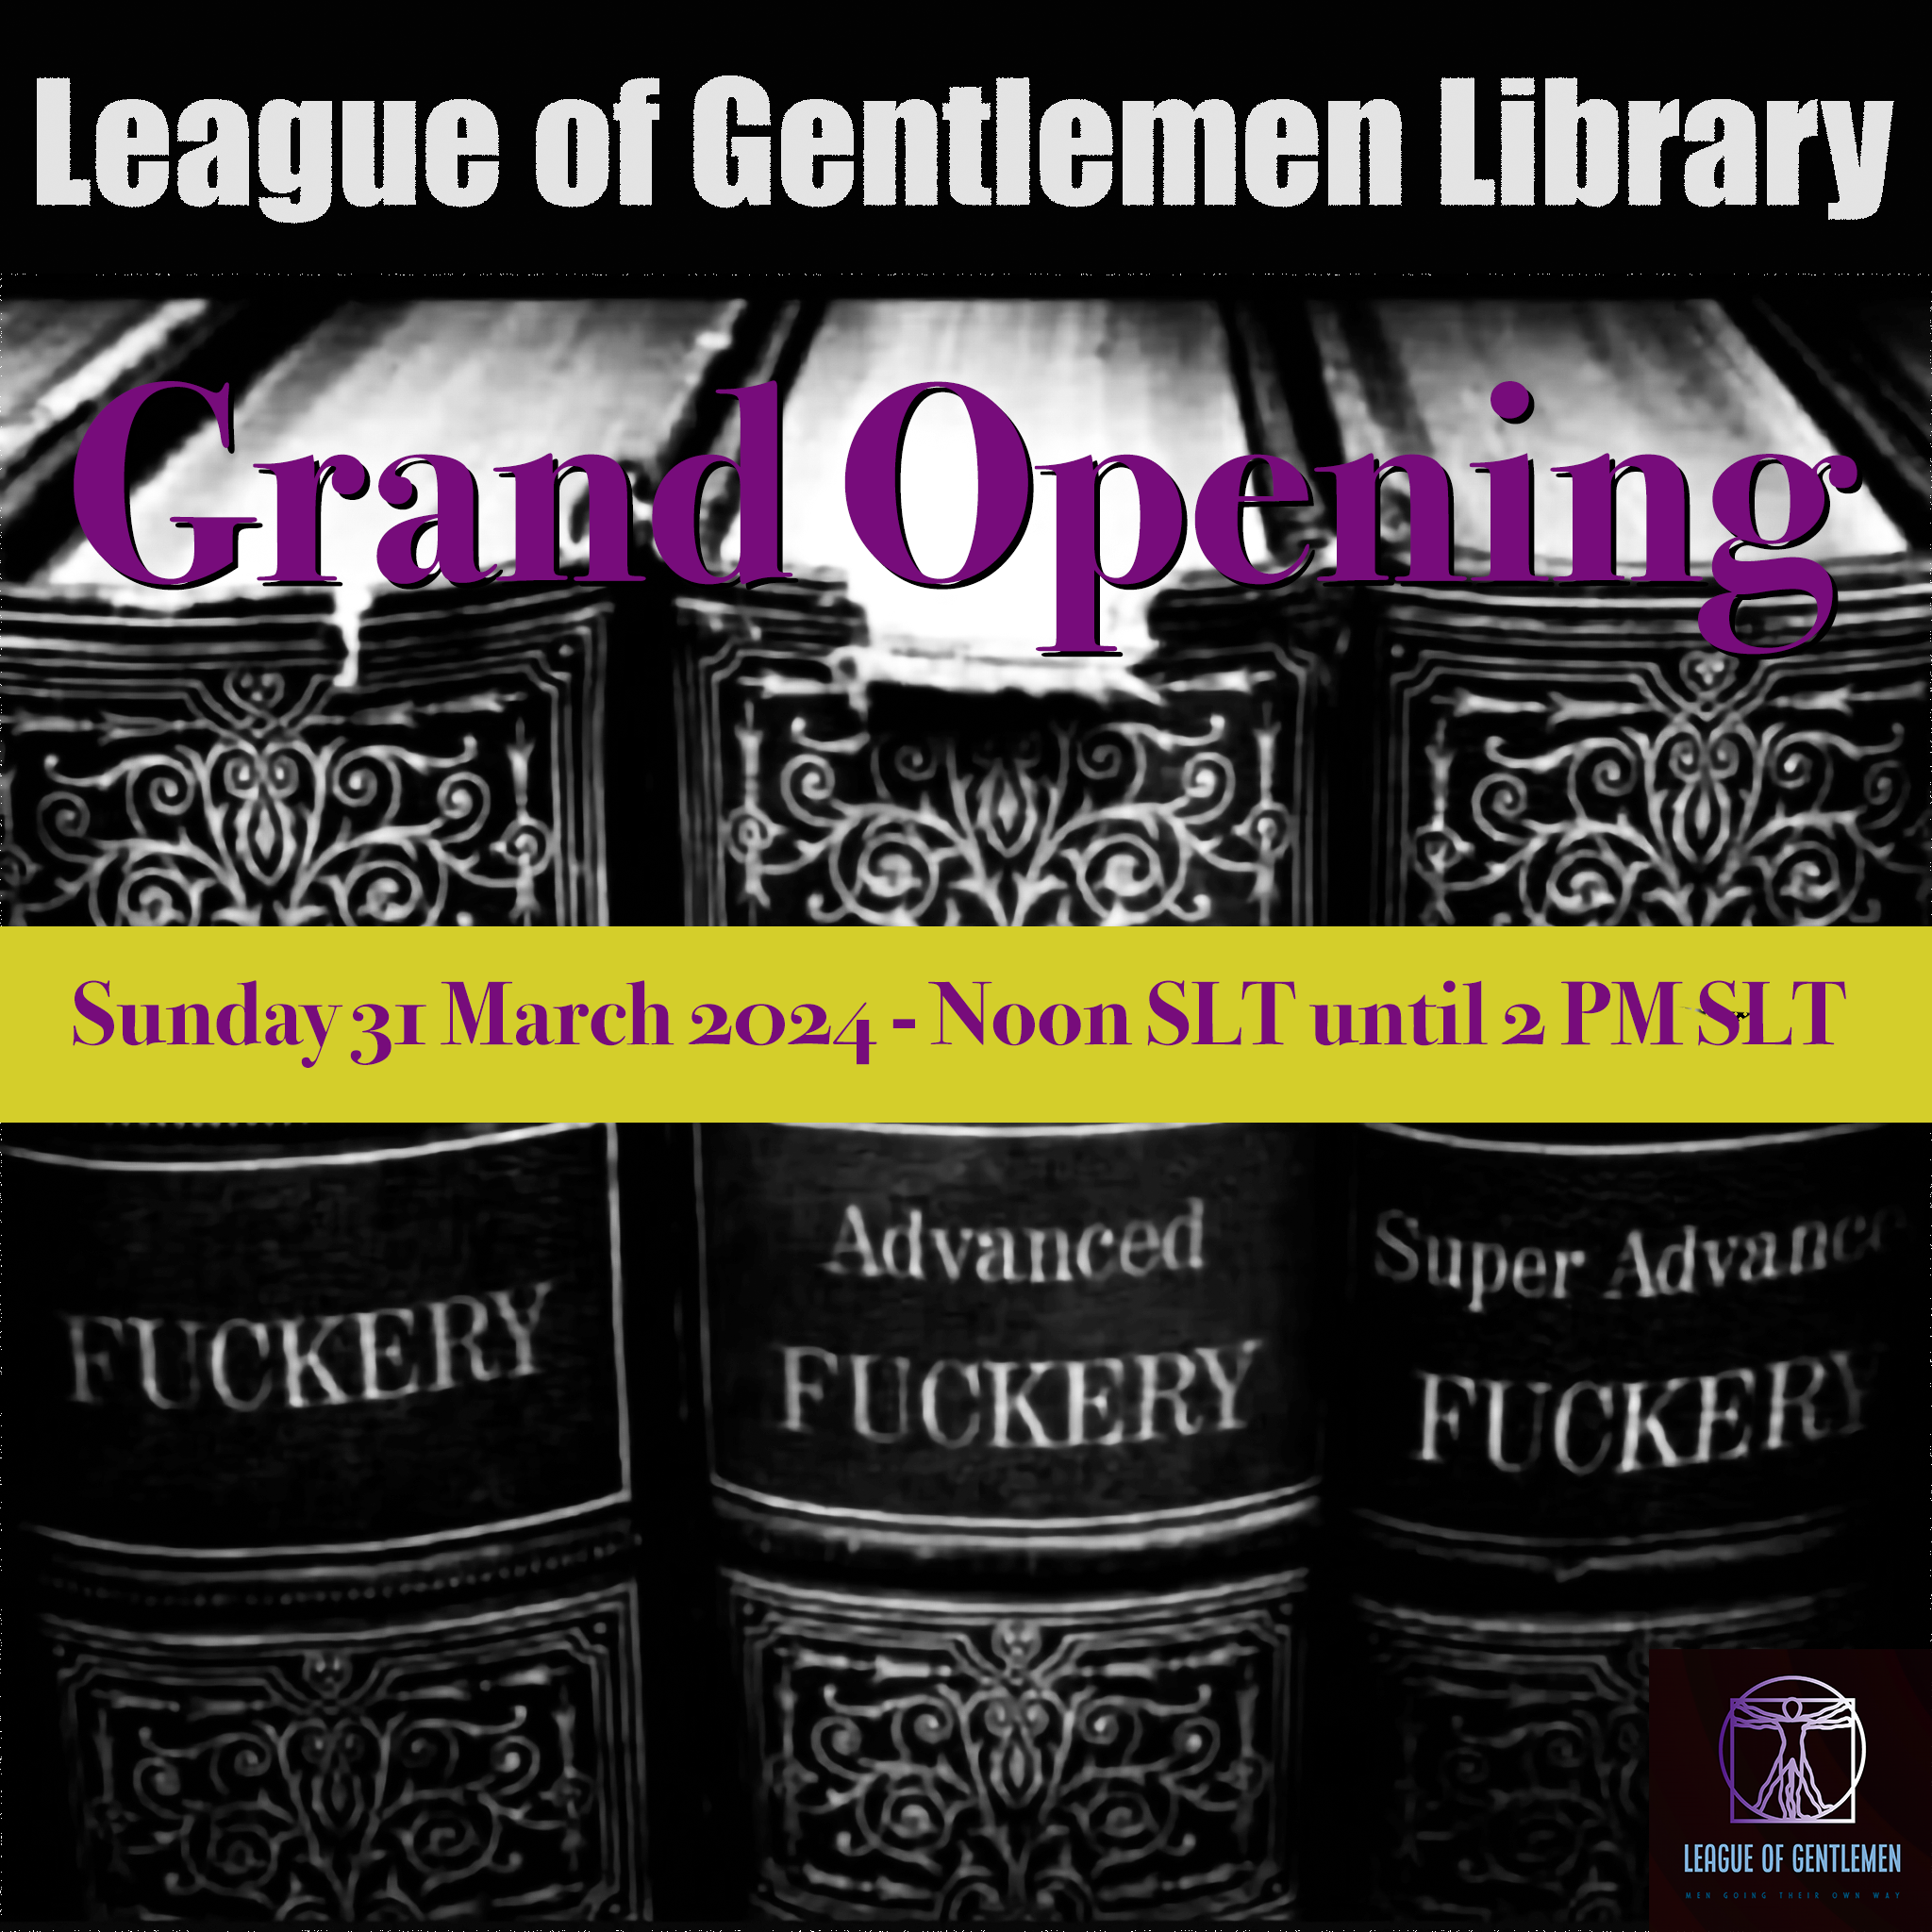 The League of Gentlemen @ TLoG Library - Sunday 31 March 2024 - Noon SLT until 2 PM SL